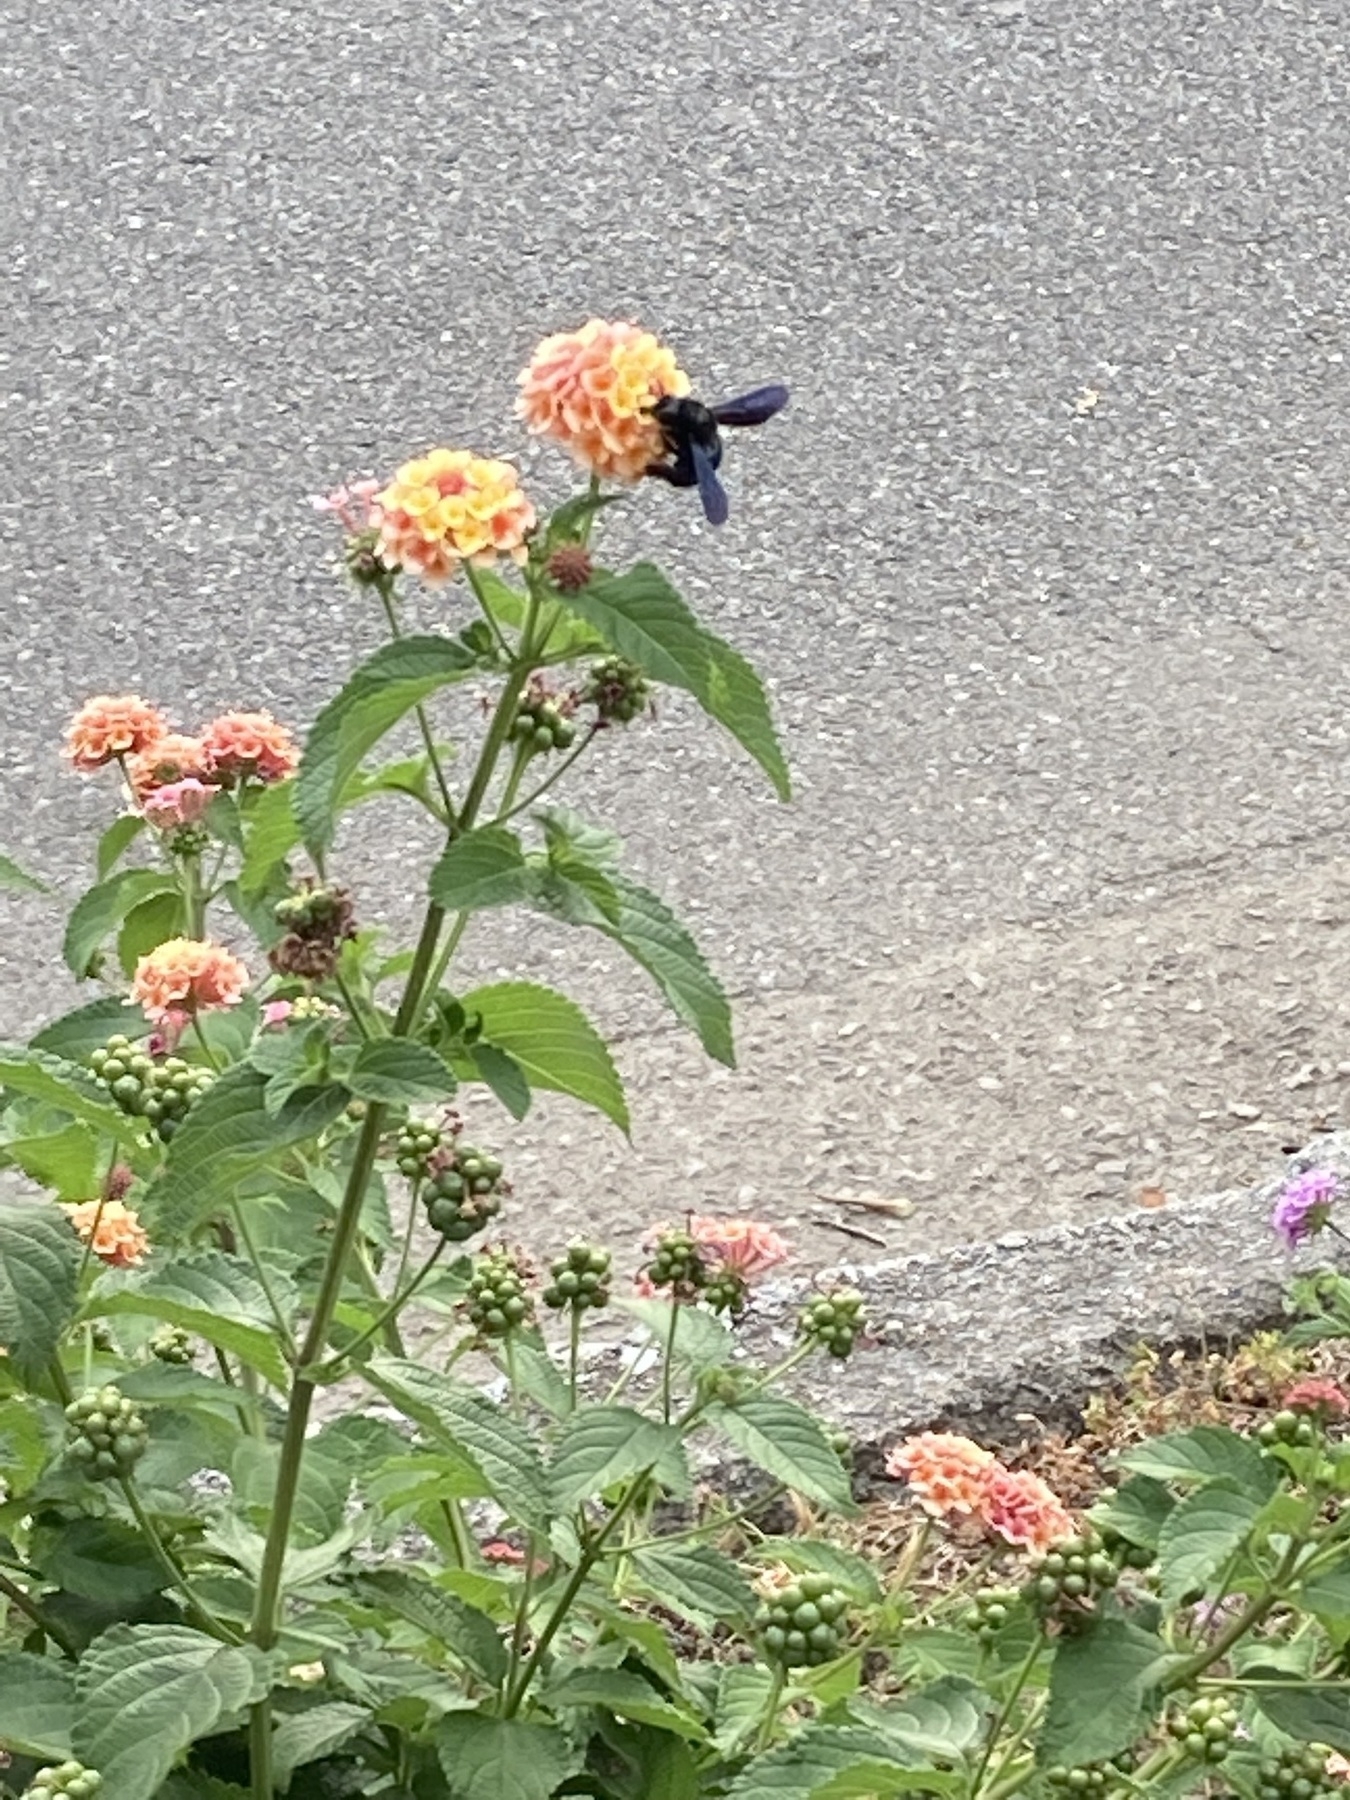 A black bee on a flower